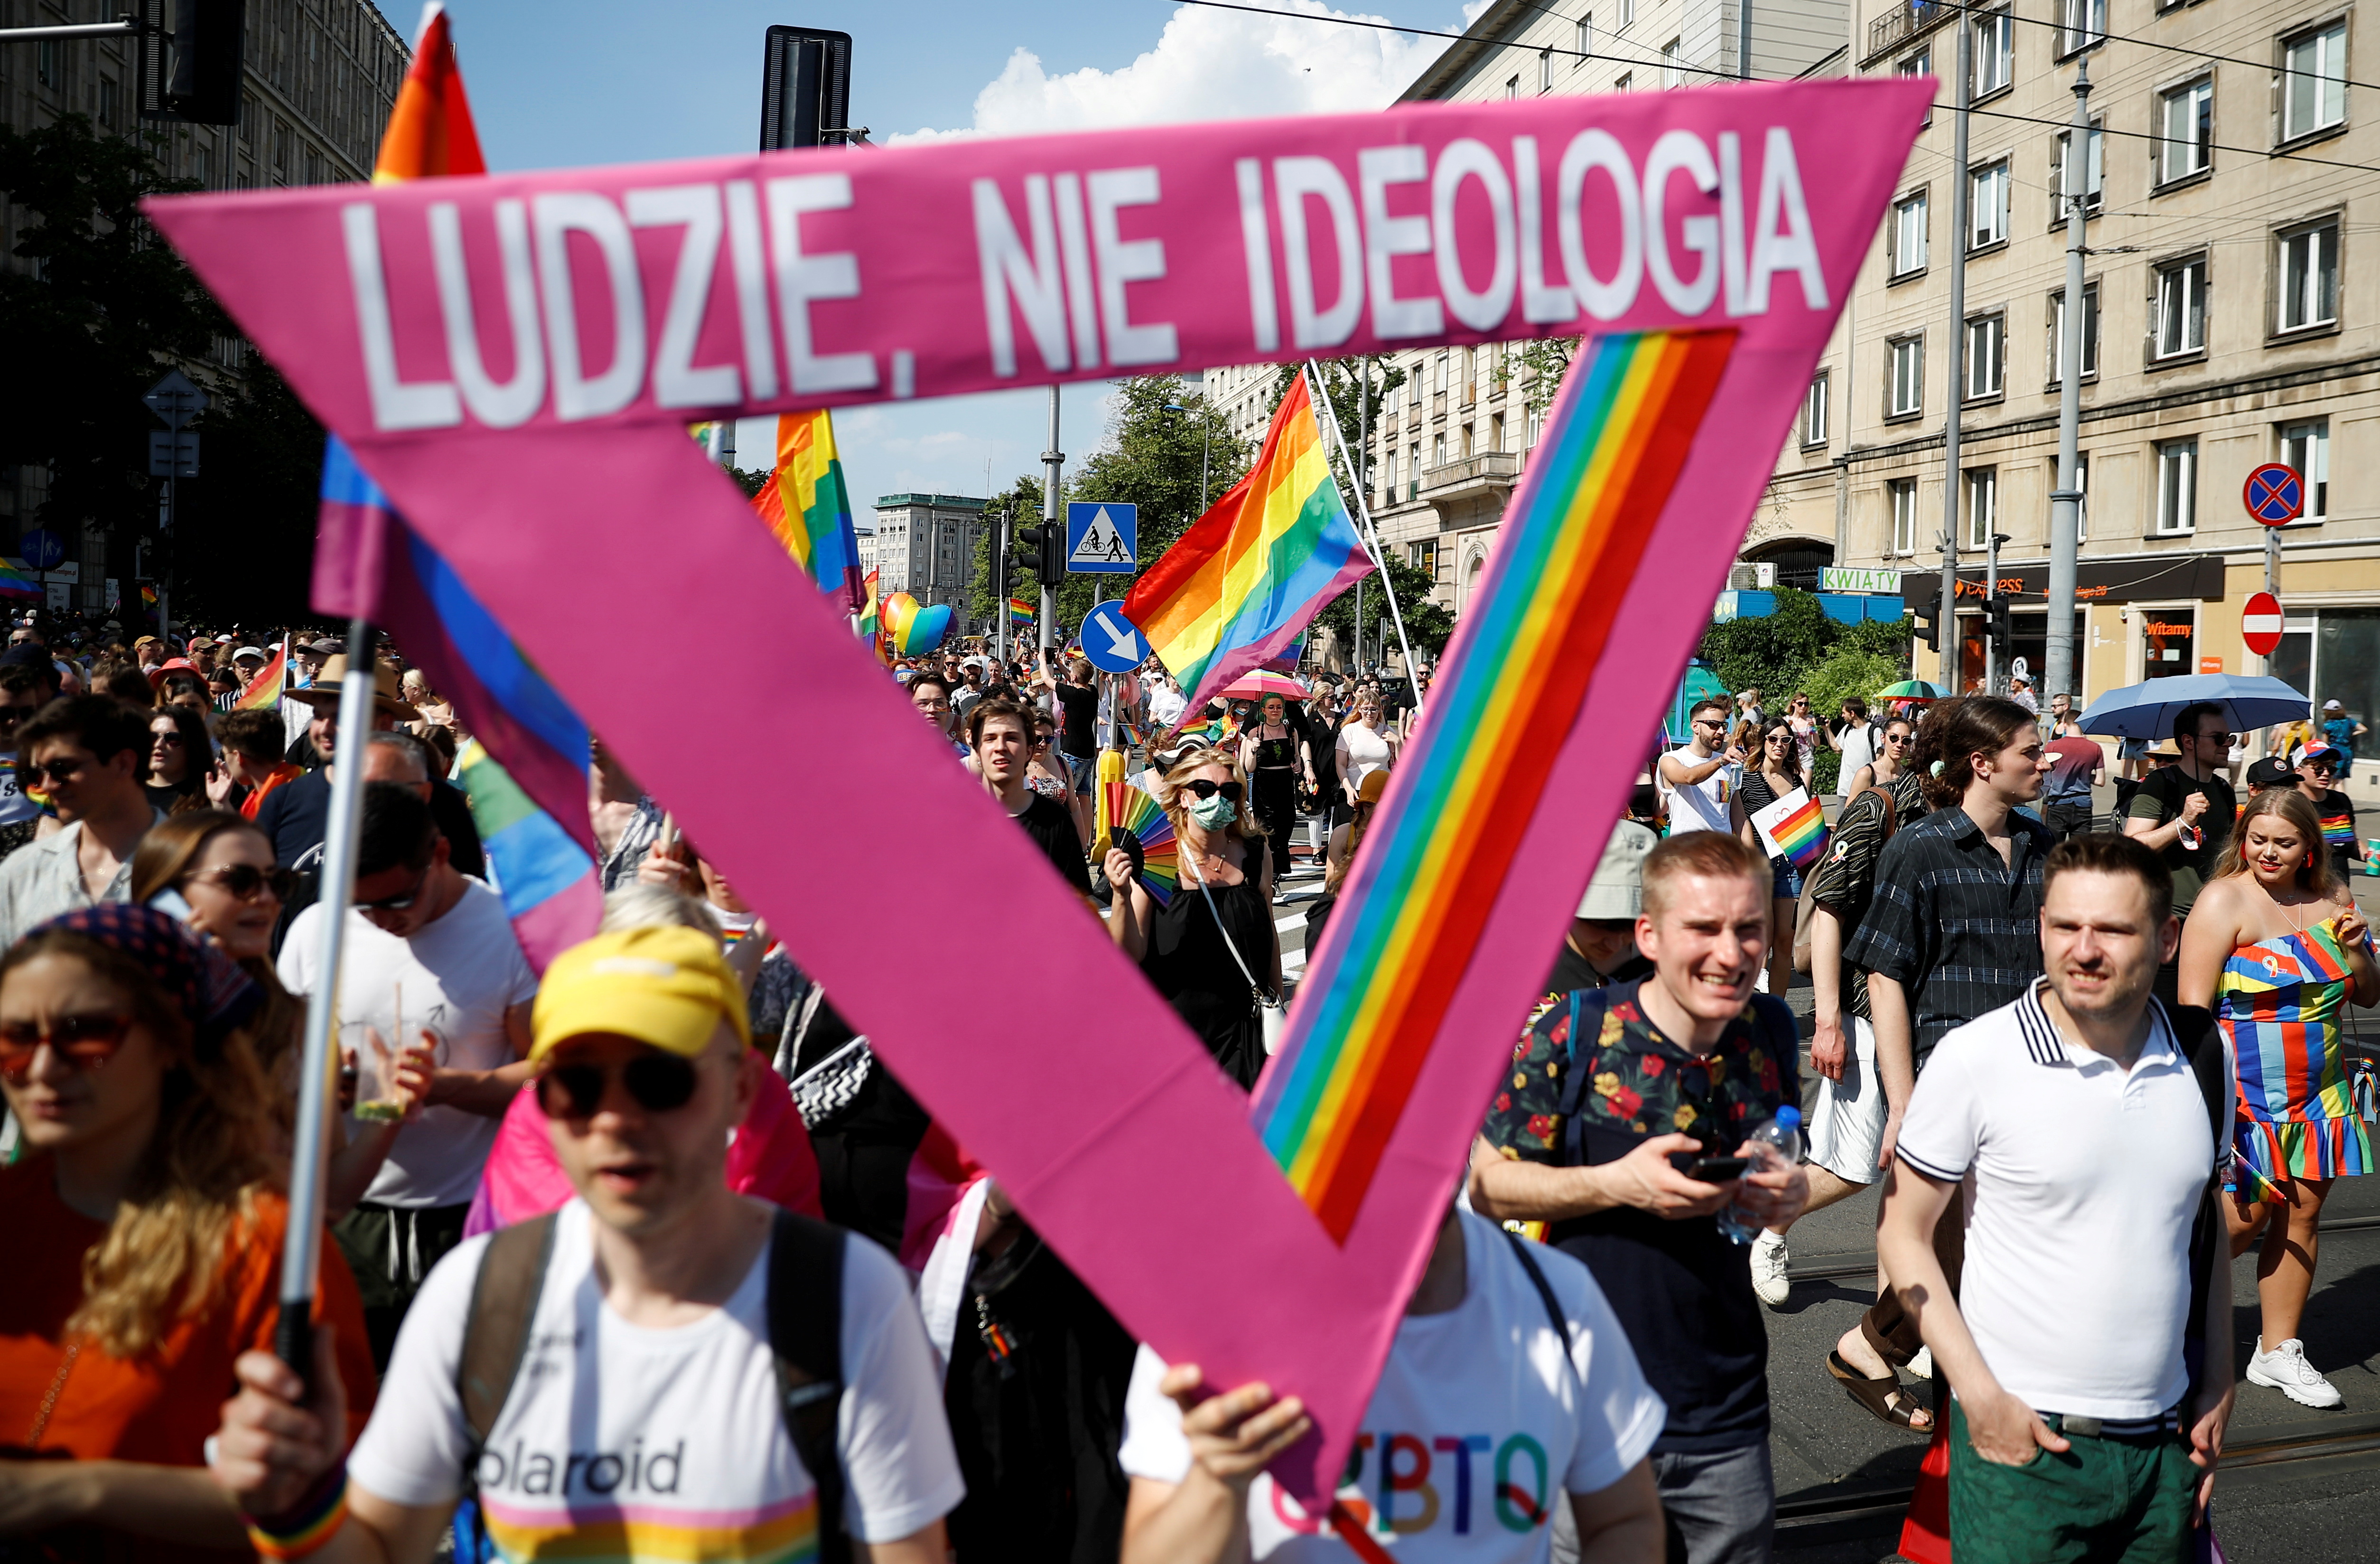 Polish education minister says LGBT march 'insult to public morality